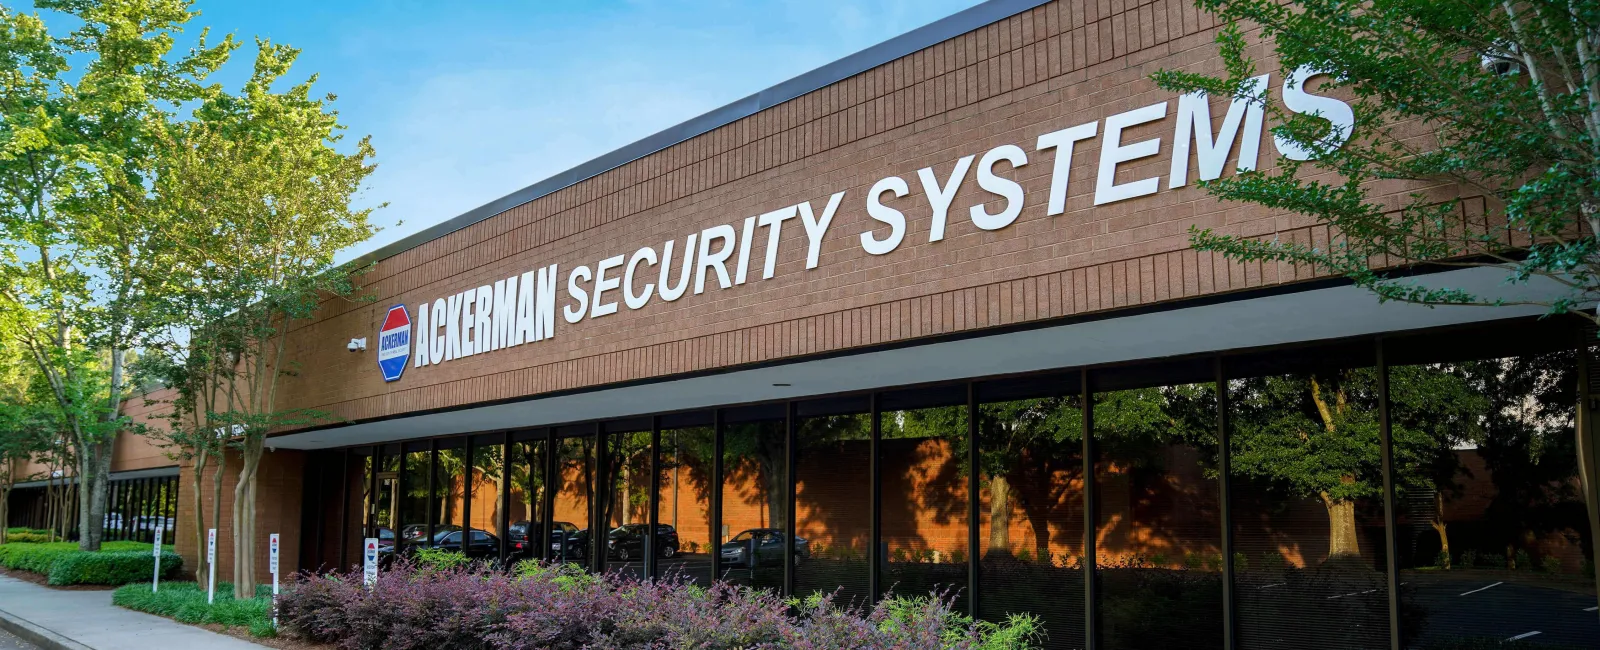 The History of Ackerman Security